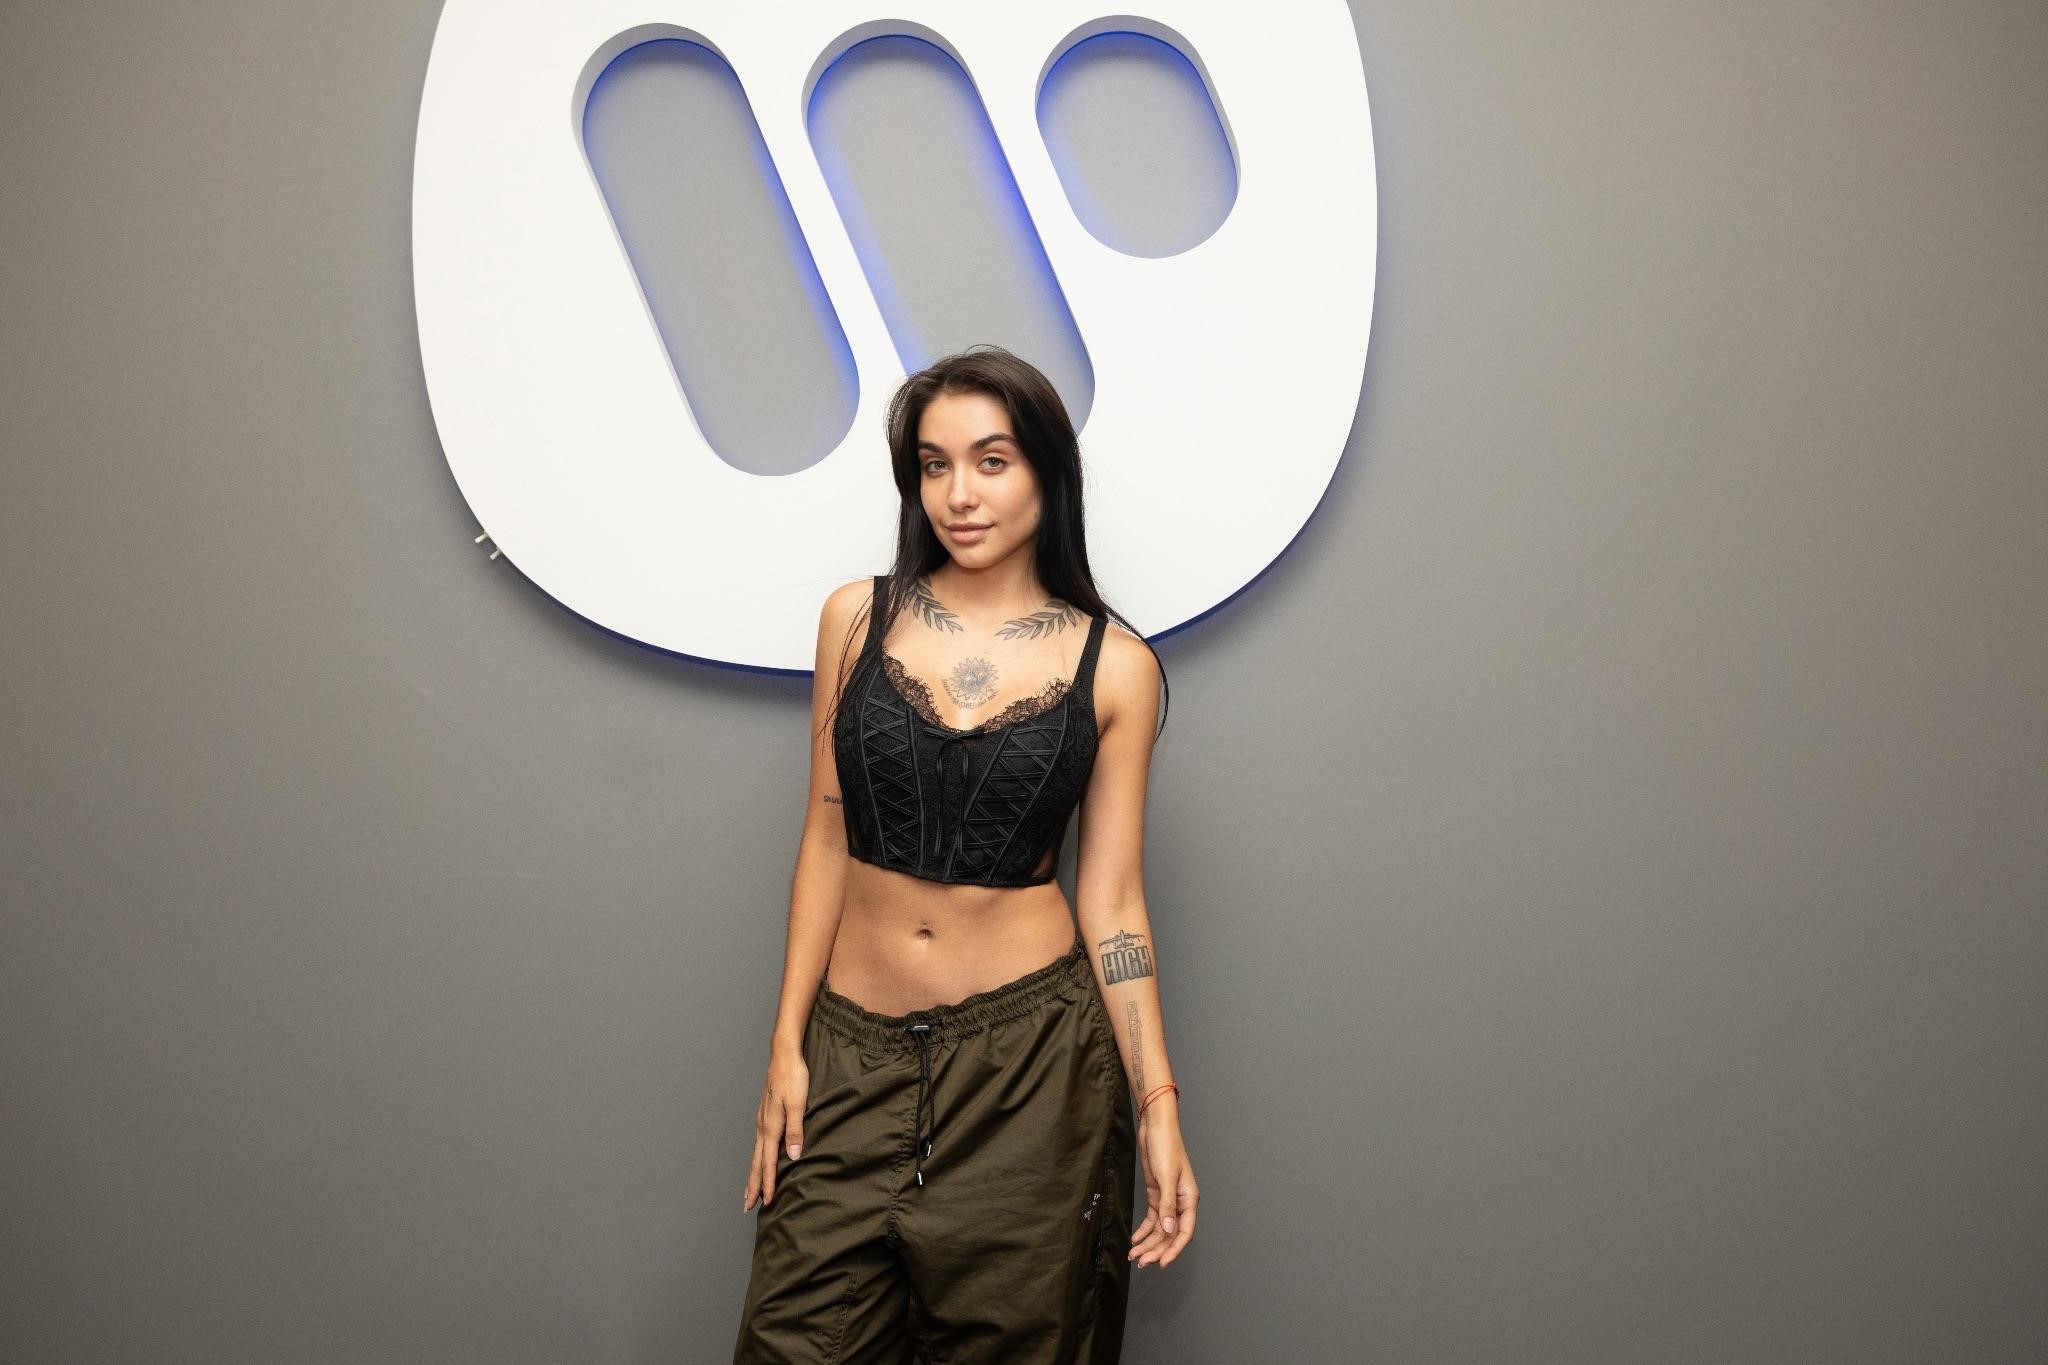 MARIA BECERRA, ONE OF THE MOST STREAMED ARTISTS IN LATIN AMERICA, SIGNS  WITH WARNER MUSIC LATINA IN NEW JOINT VENTURE WITH 300 ENTERTAINMENT -  Warner Music Group